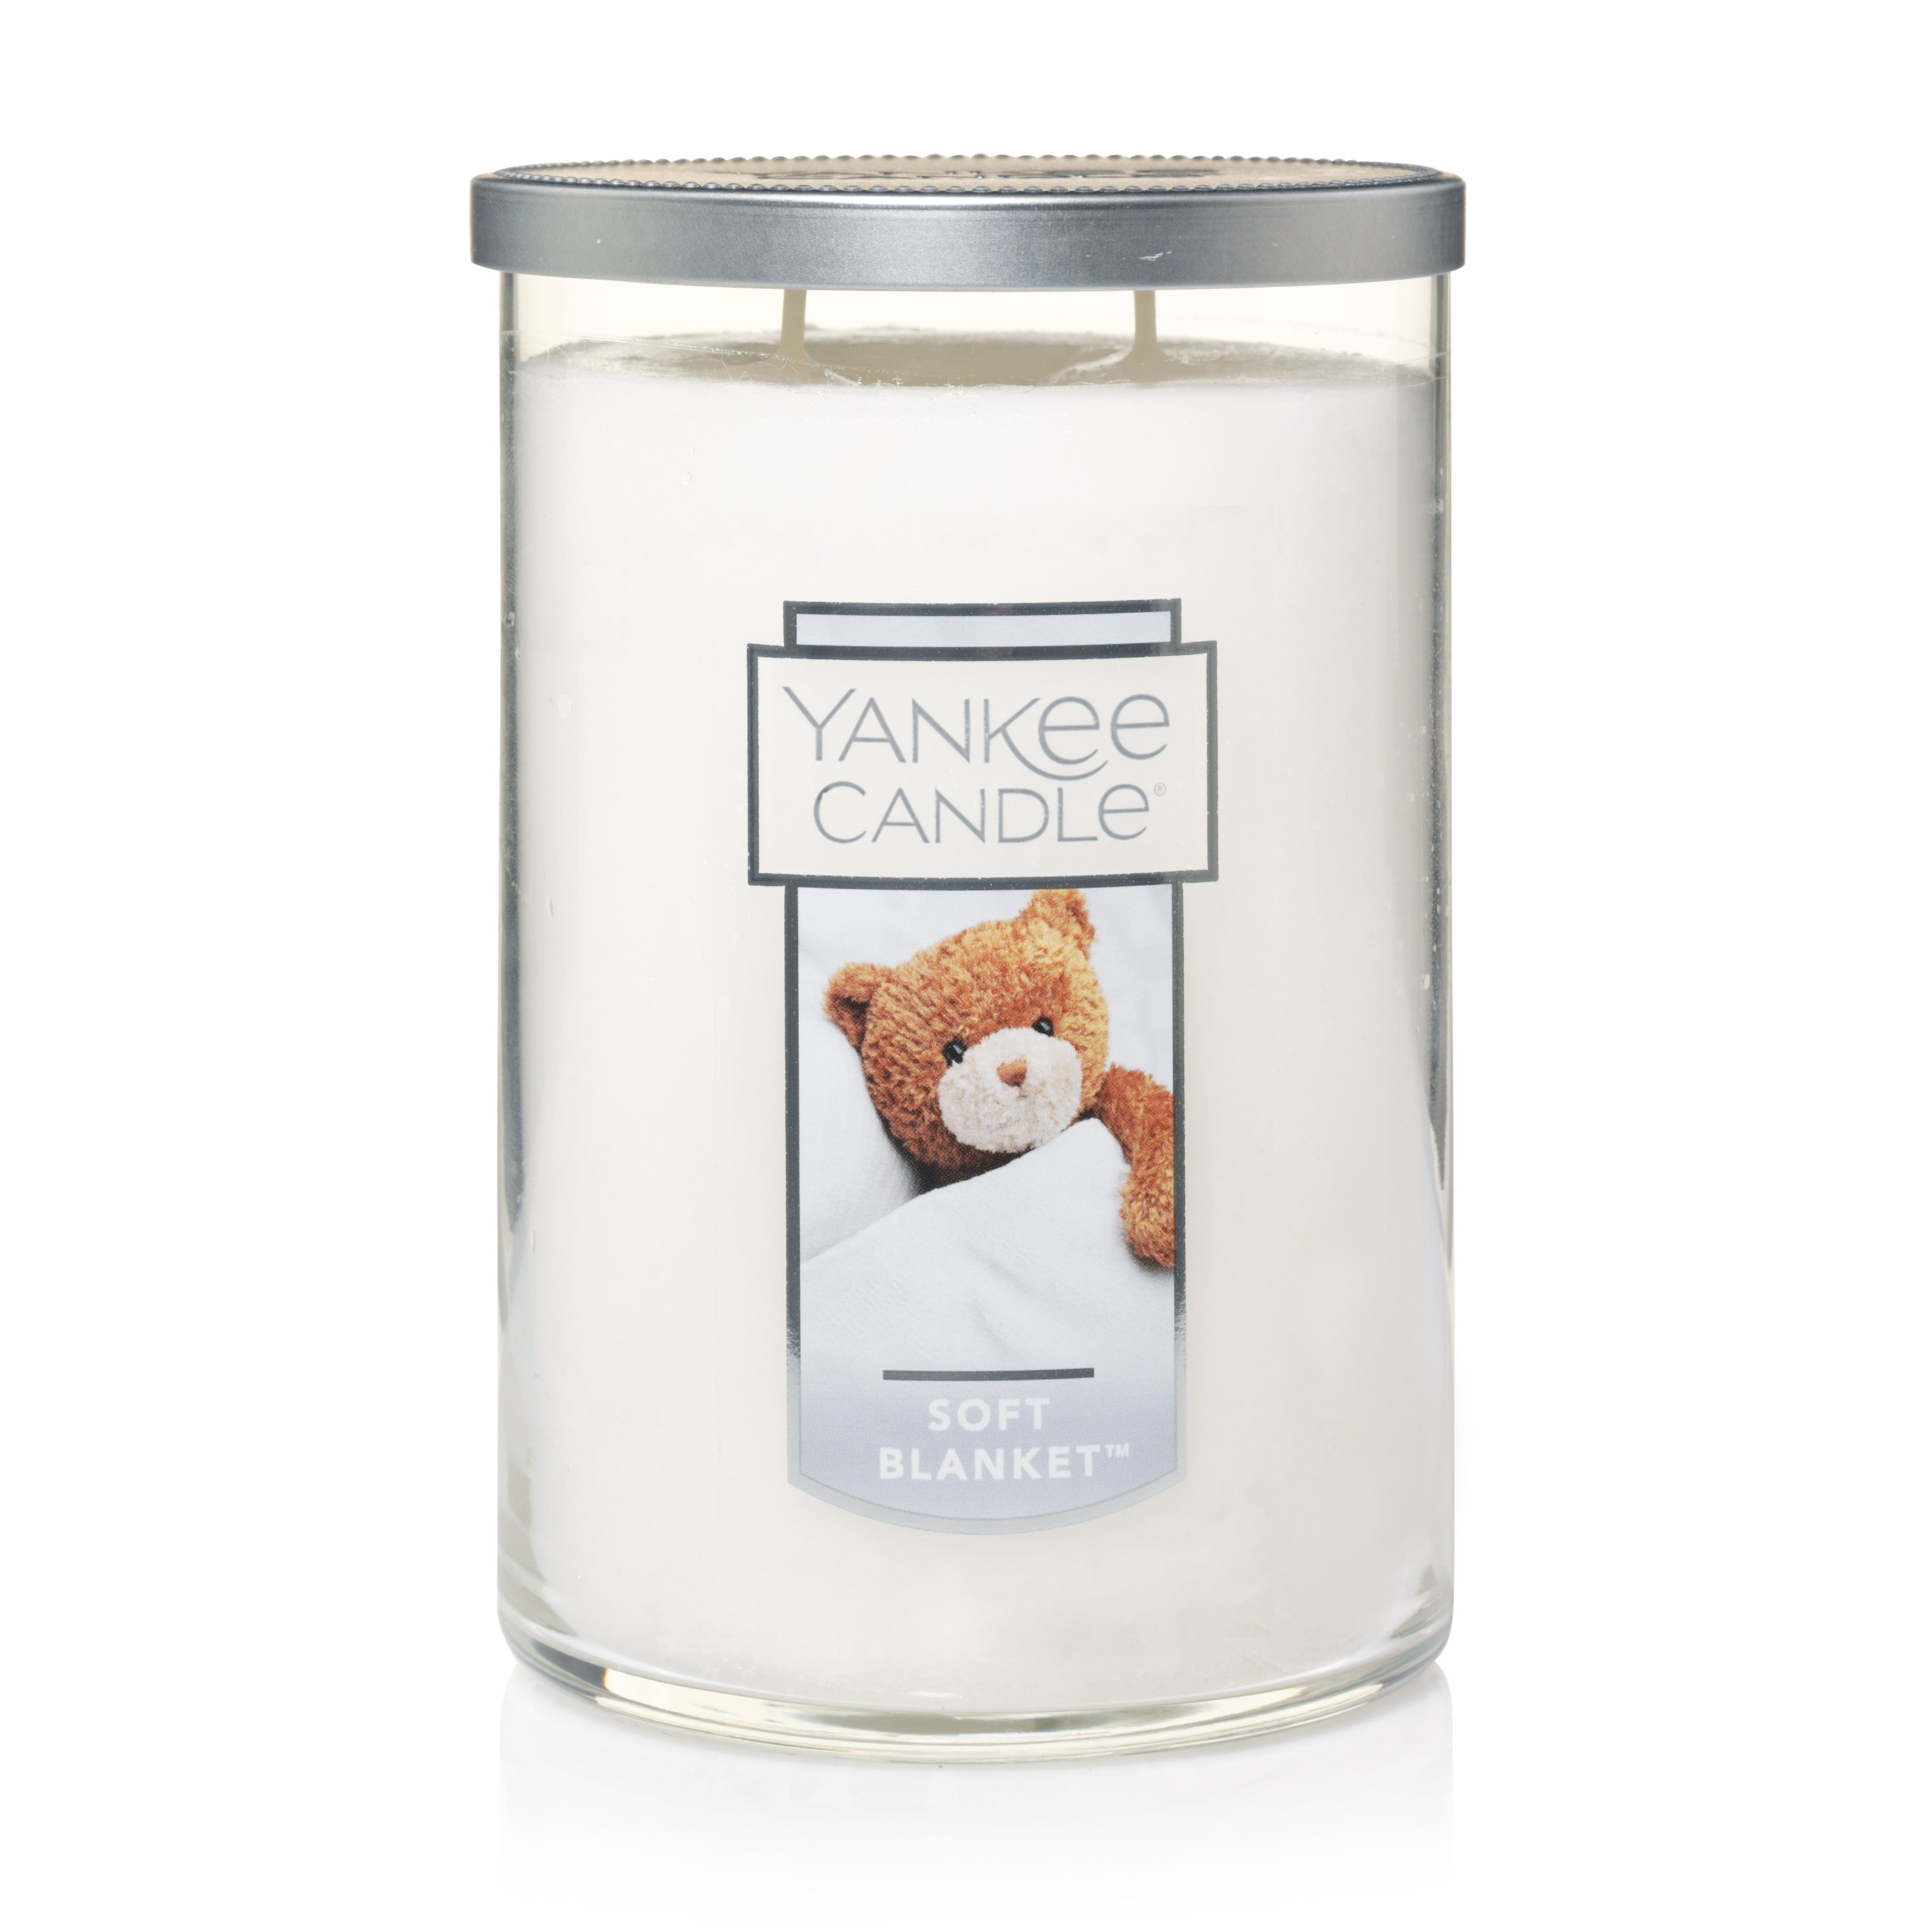 Buy Yankee Candle Tea Light Scented Candles, Soft Blanket